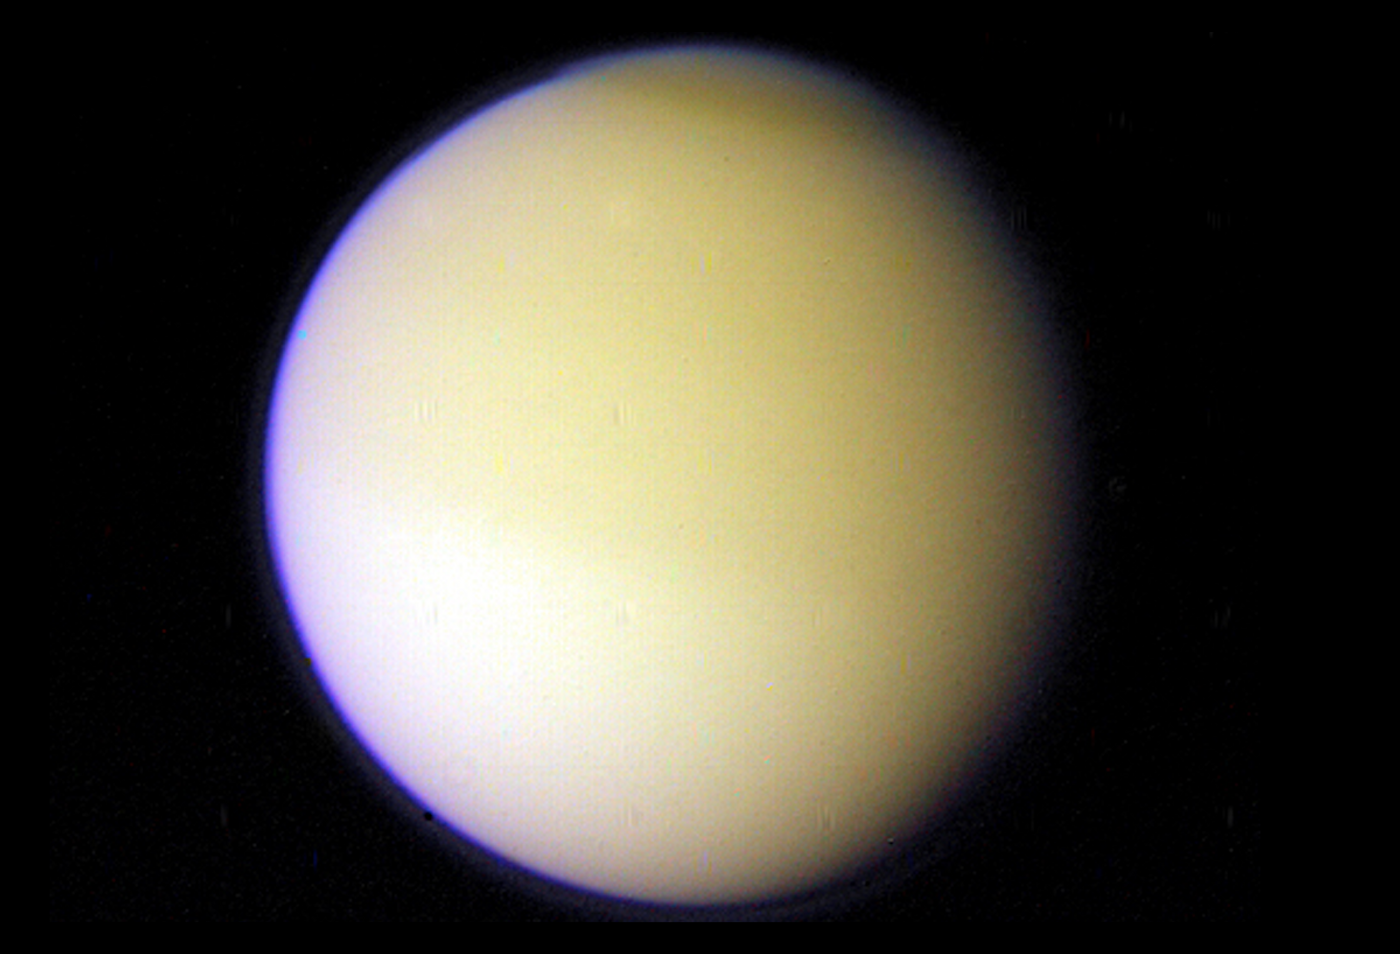 An image of Saturn's moon Titan on November 11, 1980 during Voyager 1's flyby. Courtesy NASA/JPL-CalTech/Kevin M. Gill